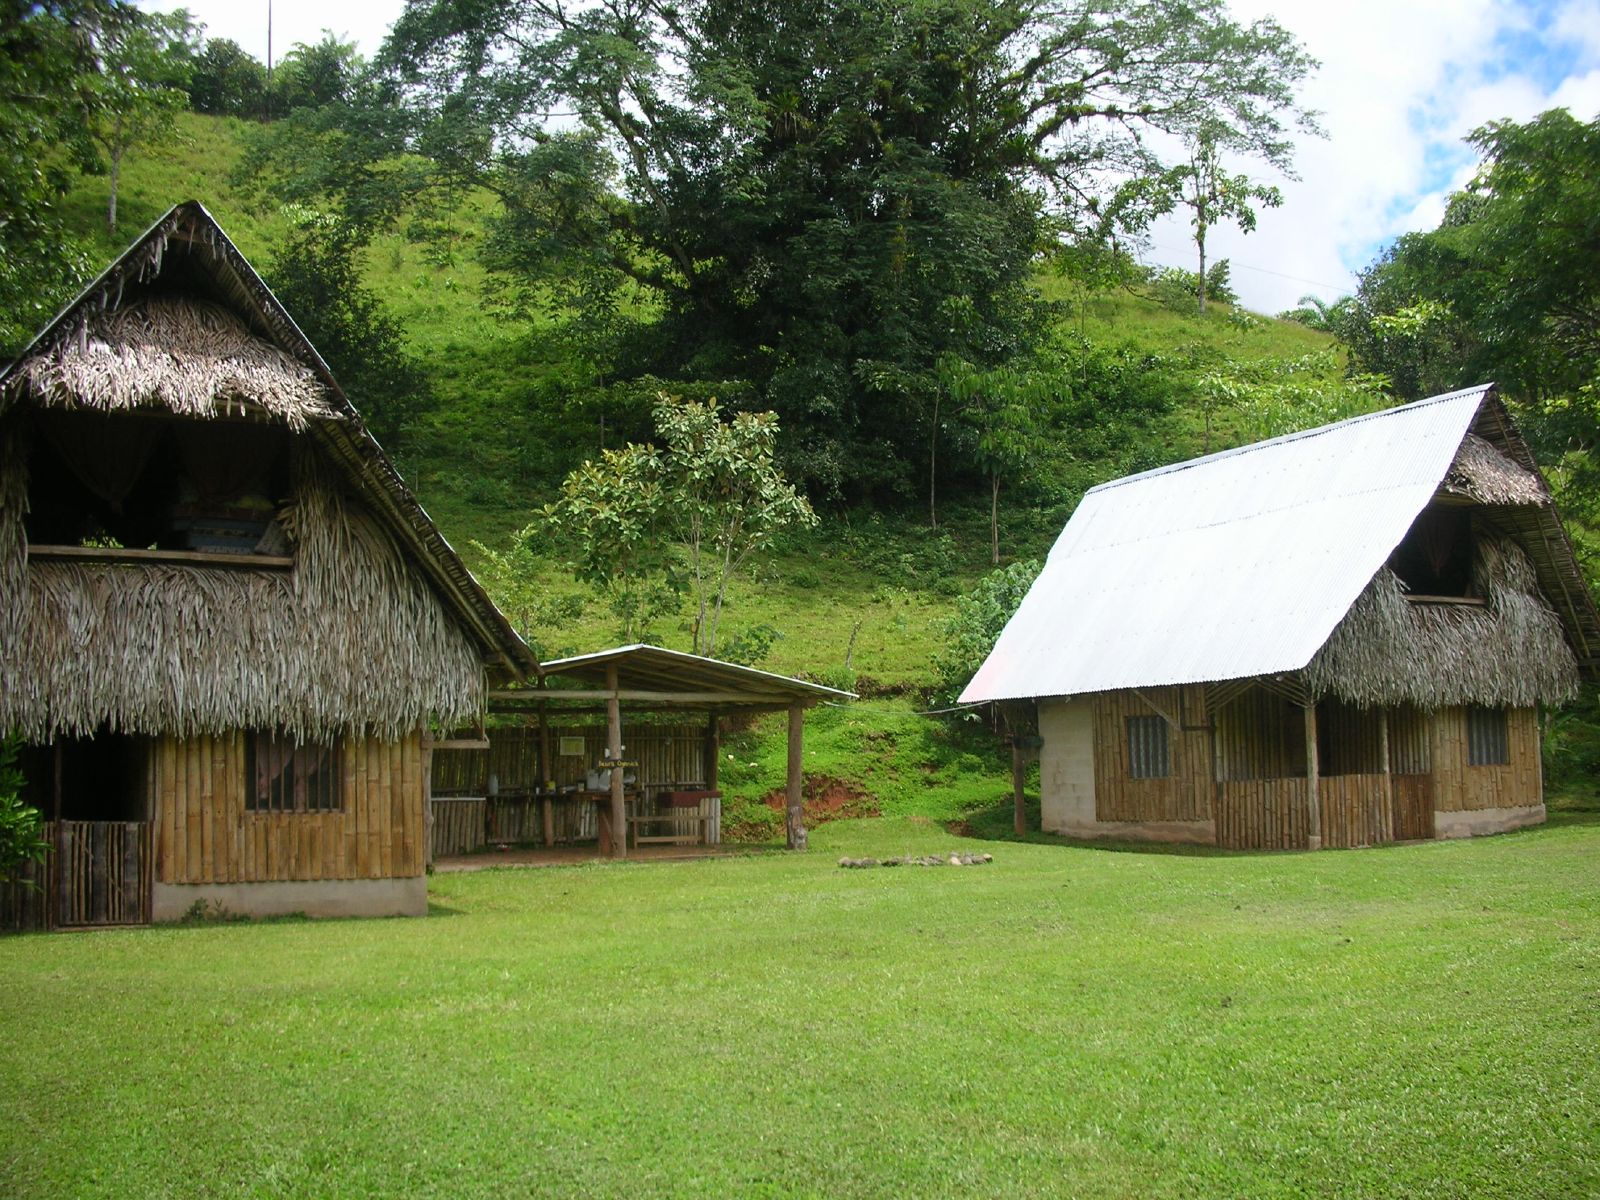 an image of some small buildings in the grass